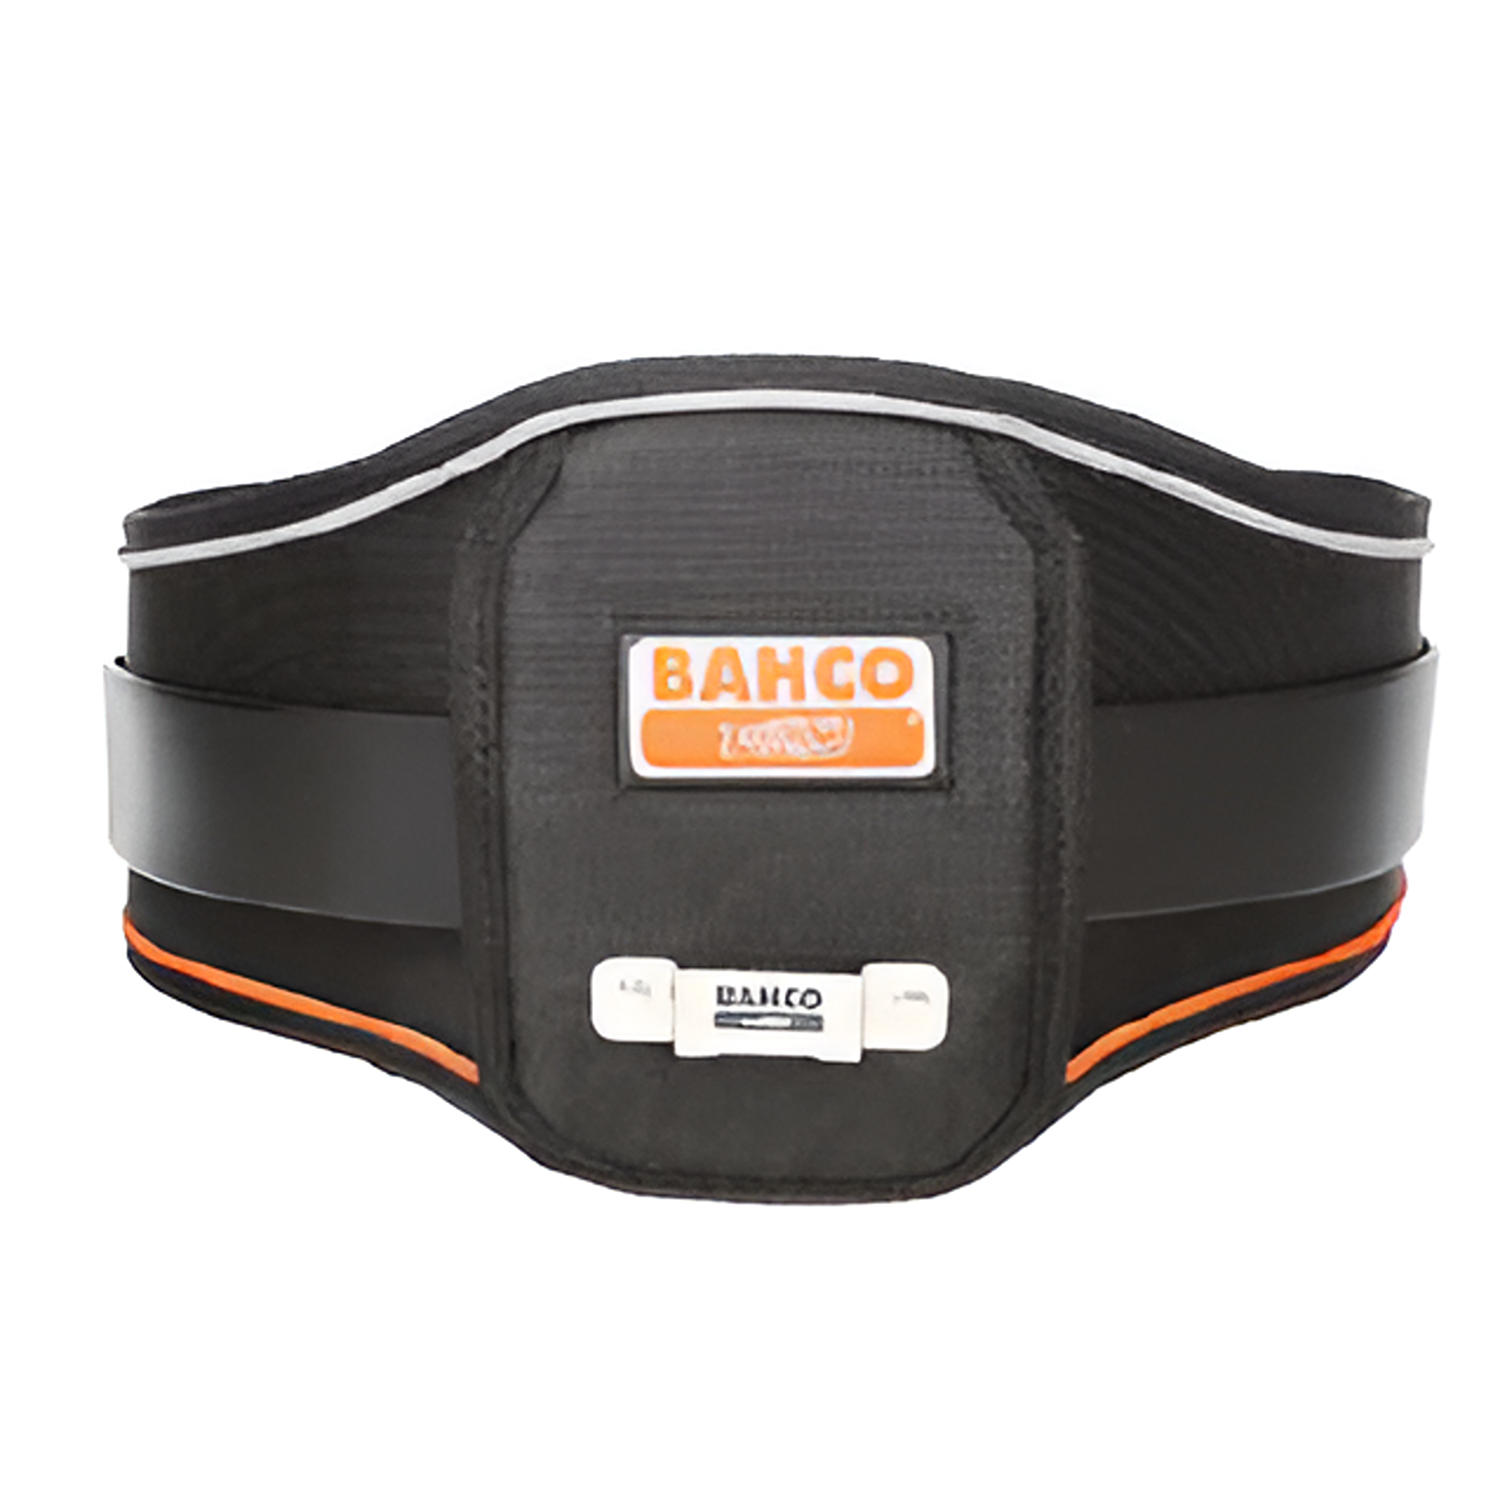 BAHCO 4750-HDB-2 Heavy Duty Belts with Cushion & Stainless Steel - Premium Heavy Duty Belts from BAHCO - Shop now at Yew Aik.